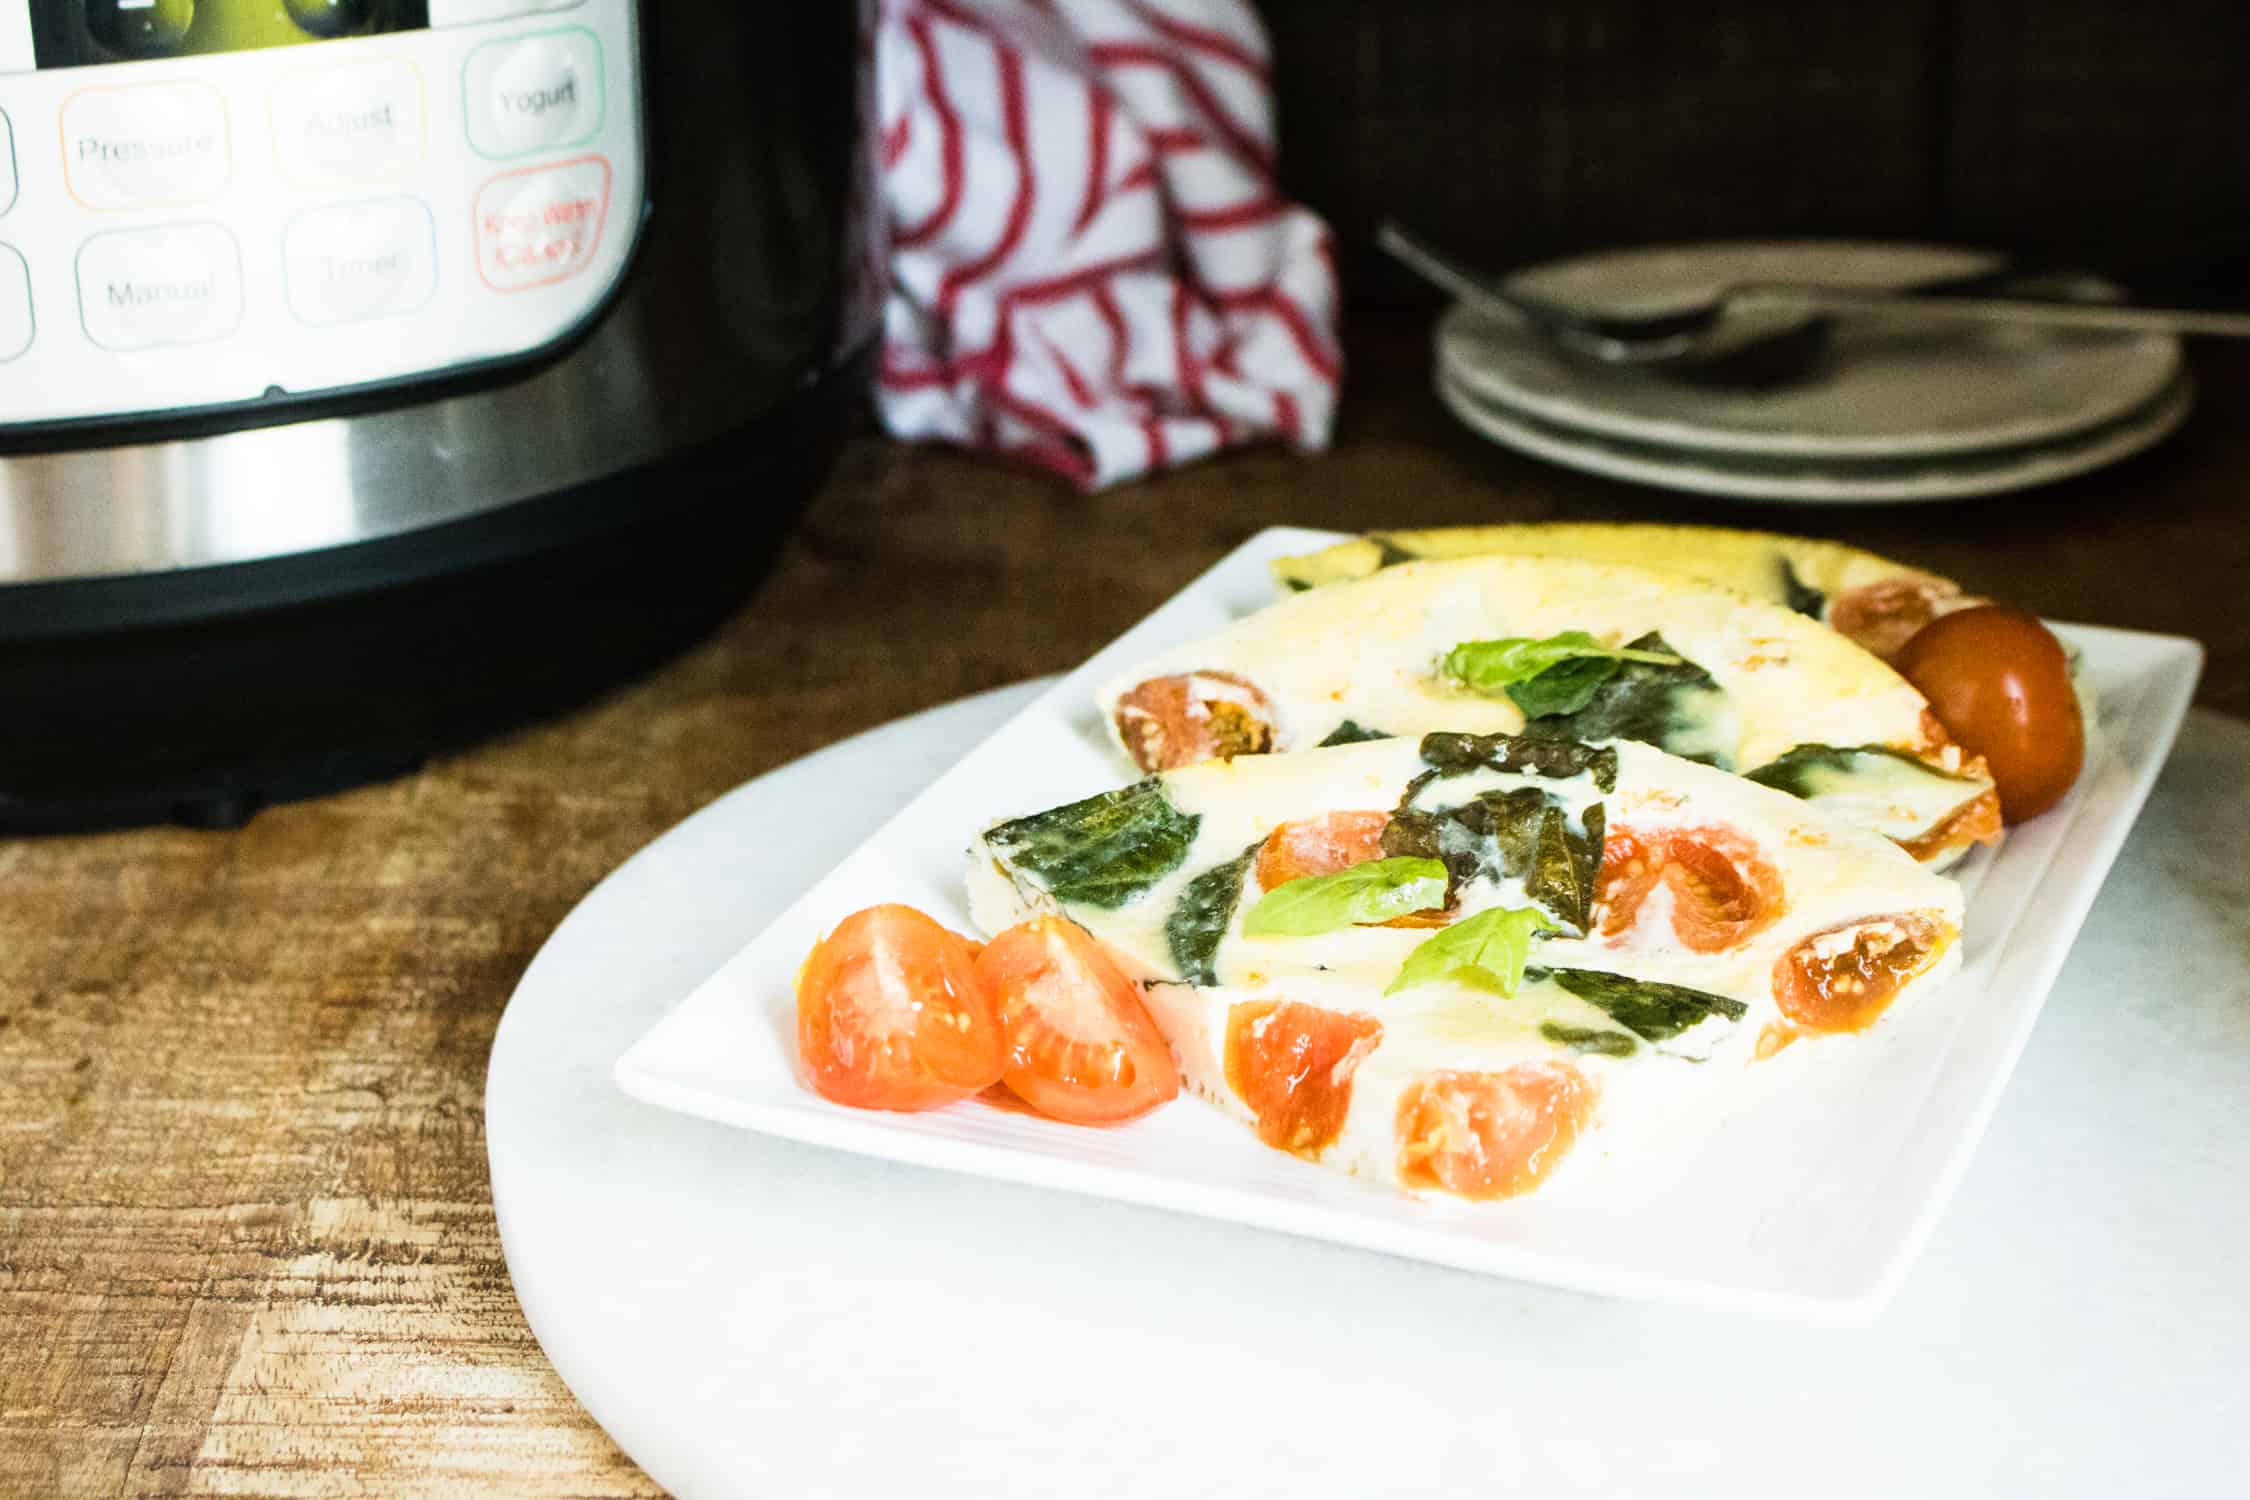 The finished Instant Pot Caprese Frittata served on a white platter and garnished with basil and cherry tomatoes next to the Instant Pot, a red striped napkin, two white lunch plates and two silver forks 